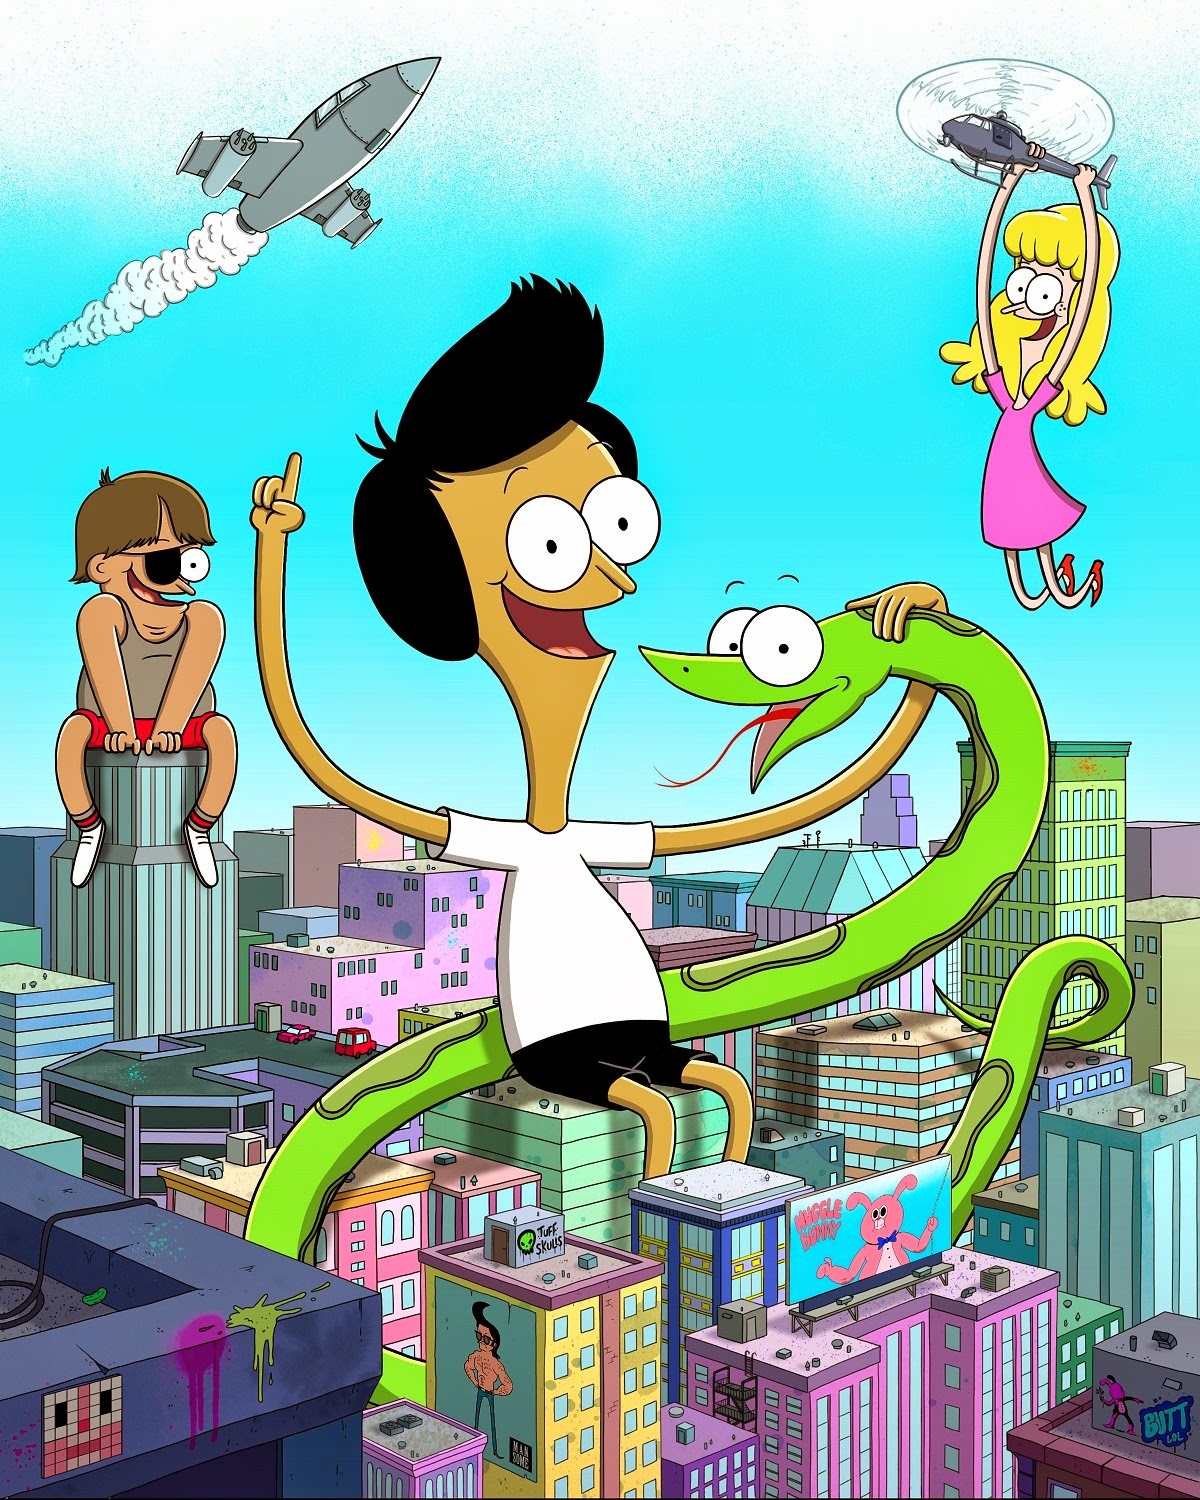 Nickelodeon USA To Premiere Brand-New Episodes Of "Sanjay and Craig&qu...